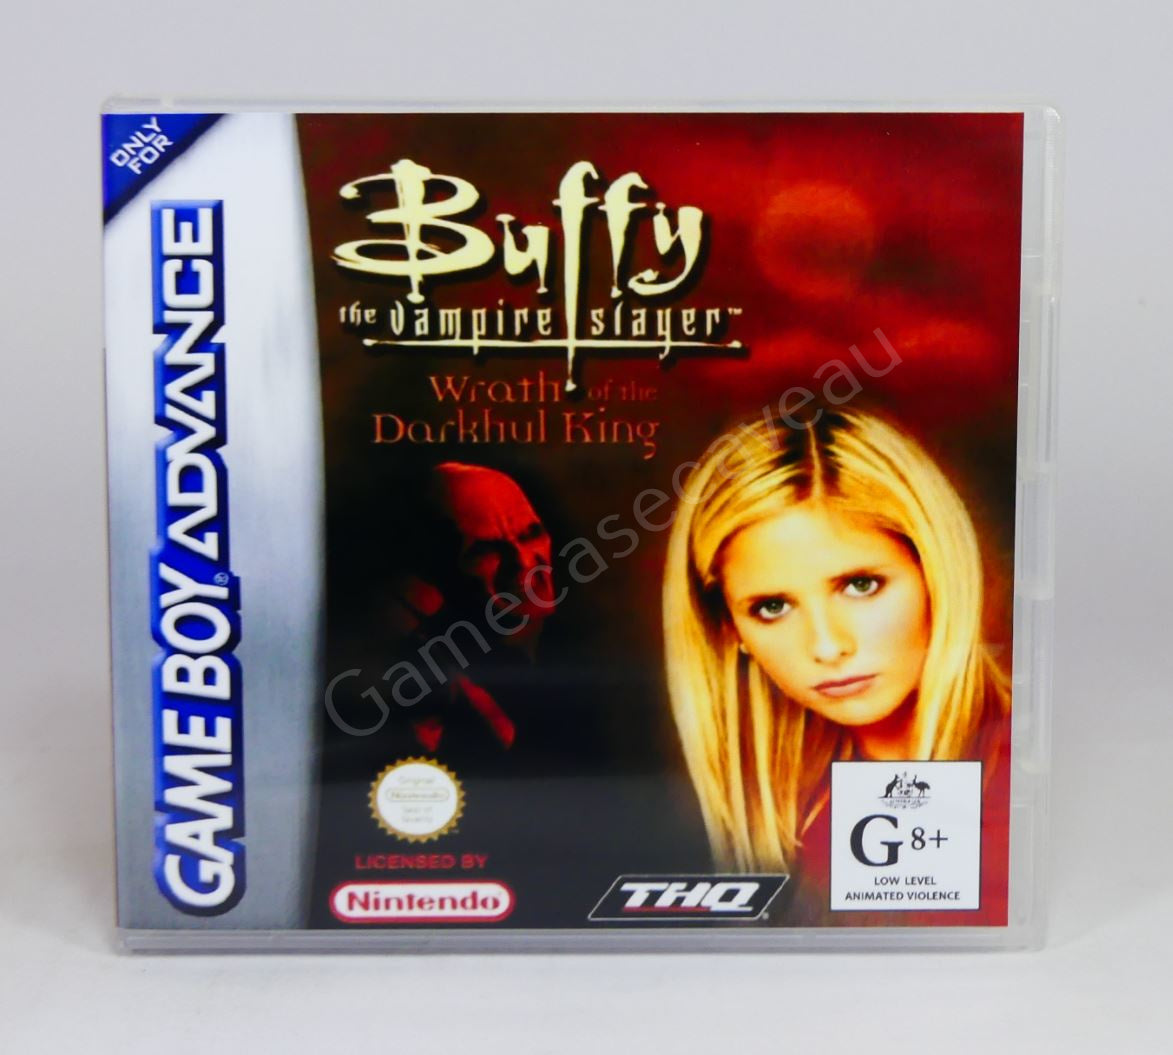 Buffy The Vampire Slayer Wrath of the Darkhul King - GBA Replacement Case